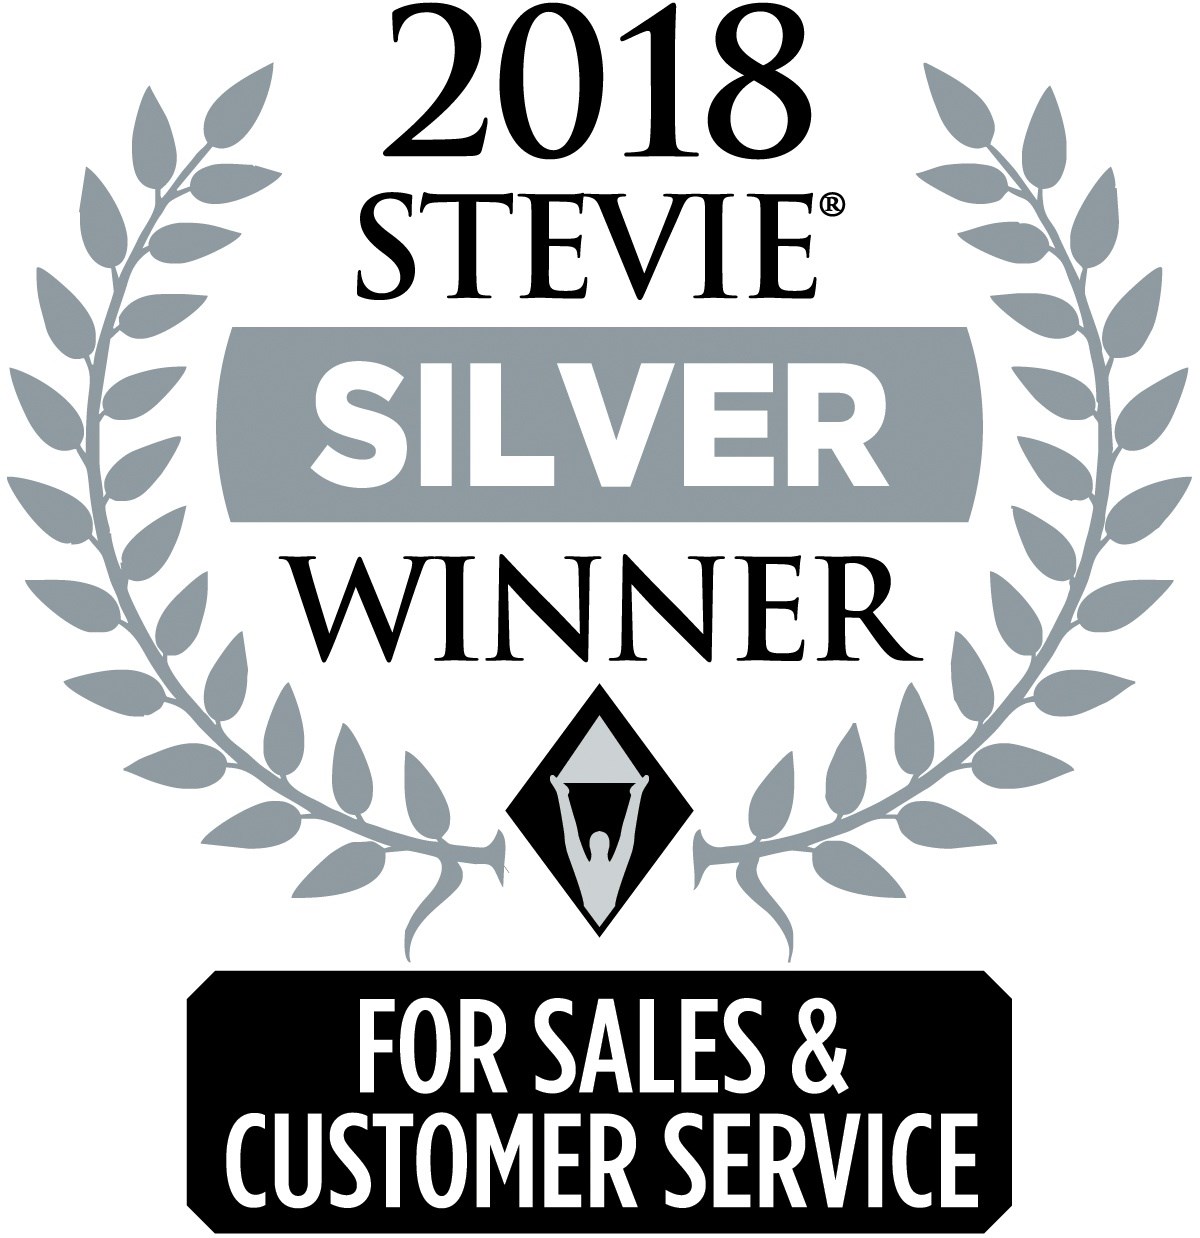 Intermedia wins Silver 2018 Stevie Award for Sales & Customer Service - Sales Distinction of the Year